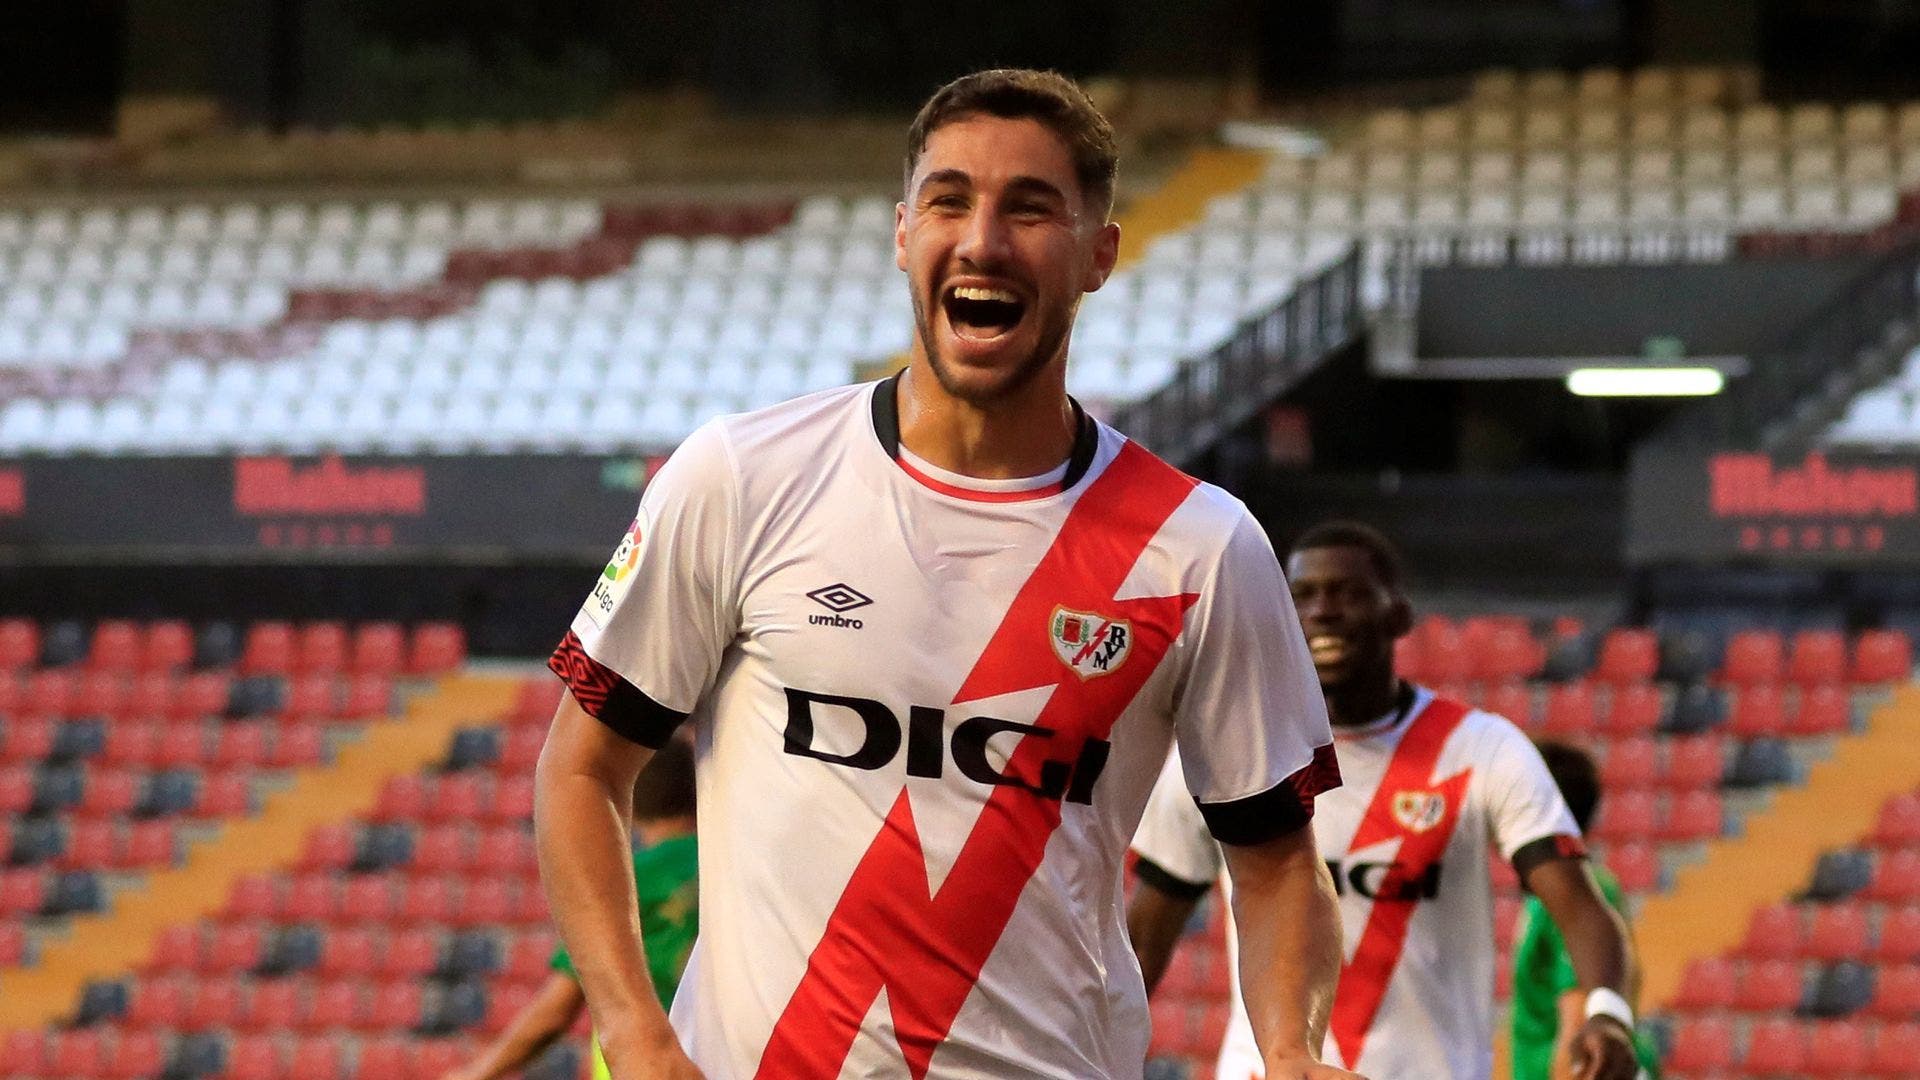 Comesaña's substitute at Rayo Vallecano is an Atlético star: he is not Saúl
	
